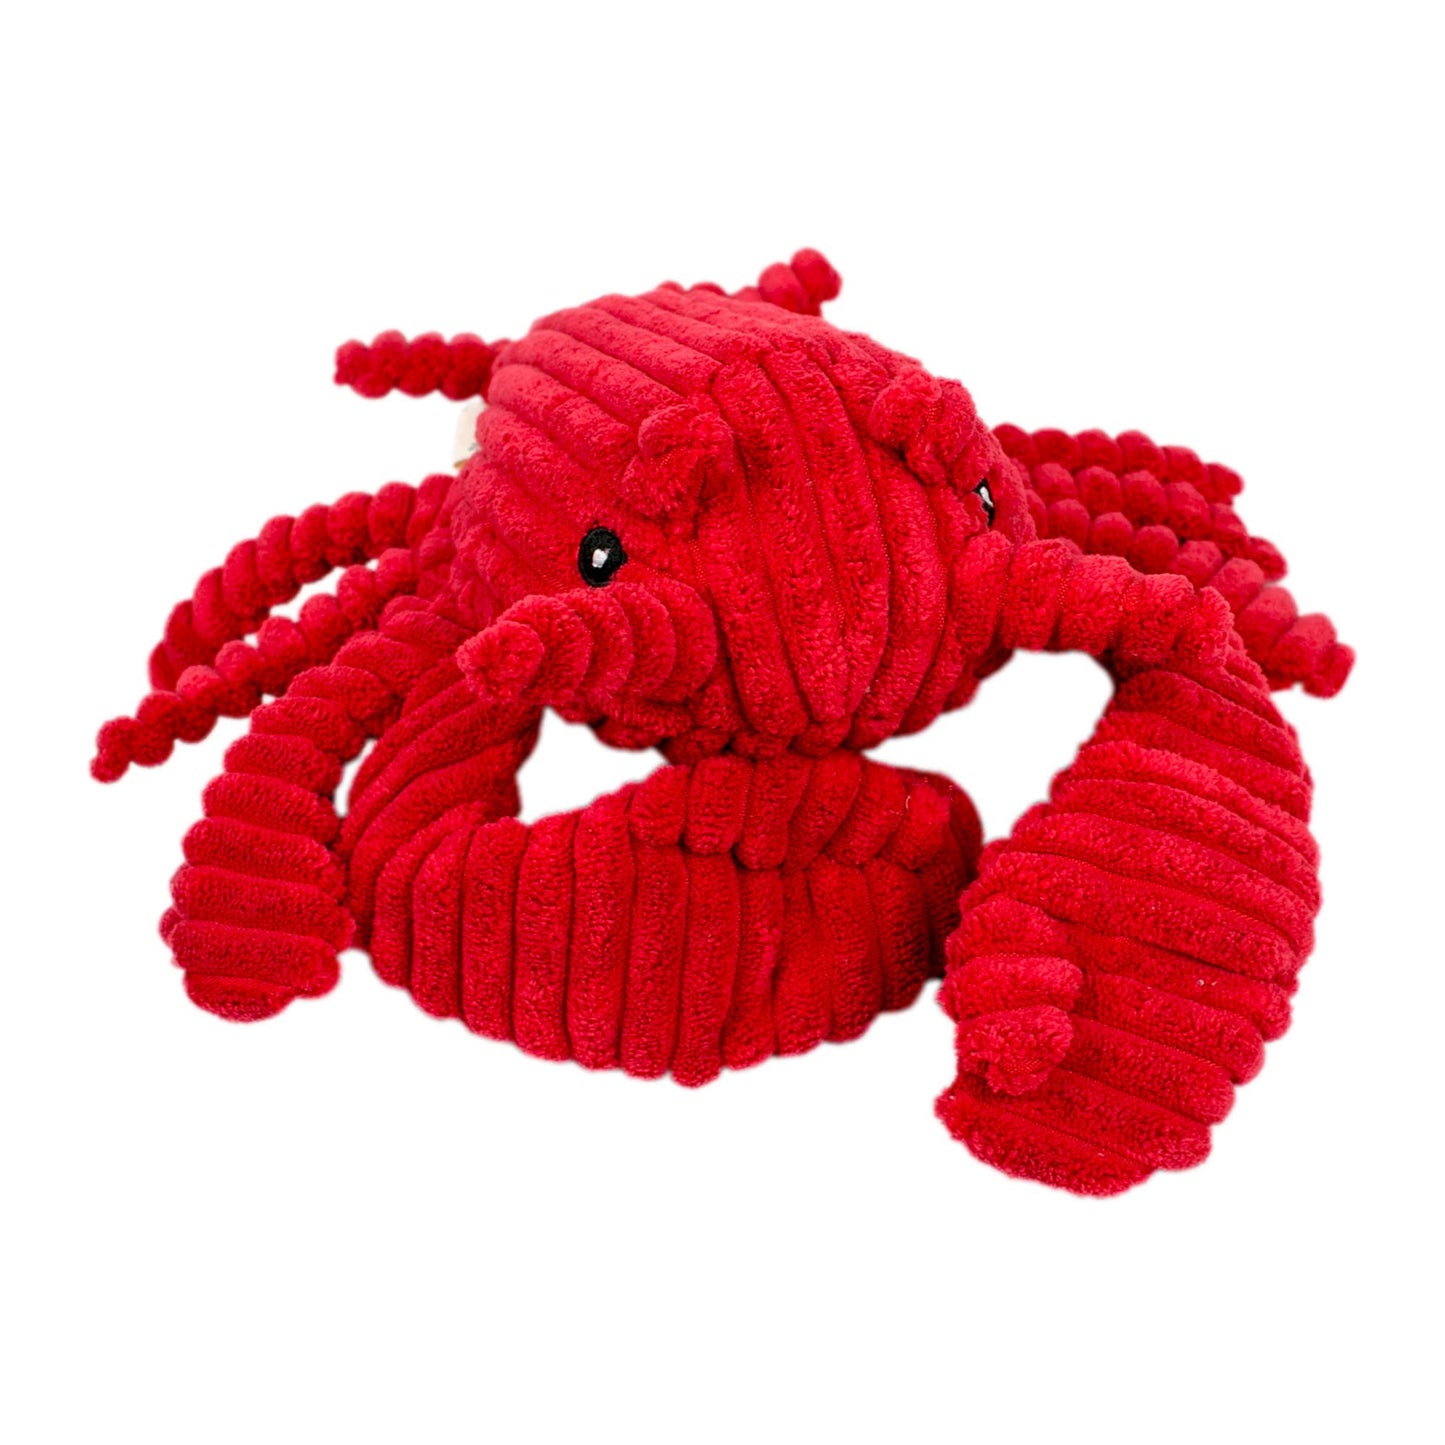 Tall Tails Crunch Plush Lobster Dog Toy - 14"